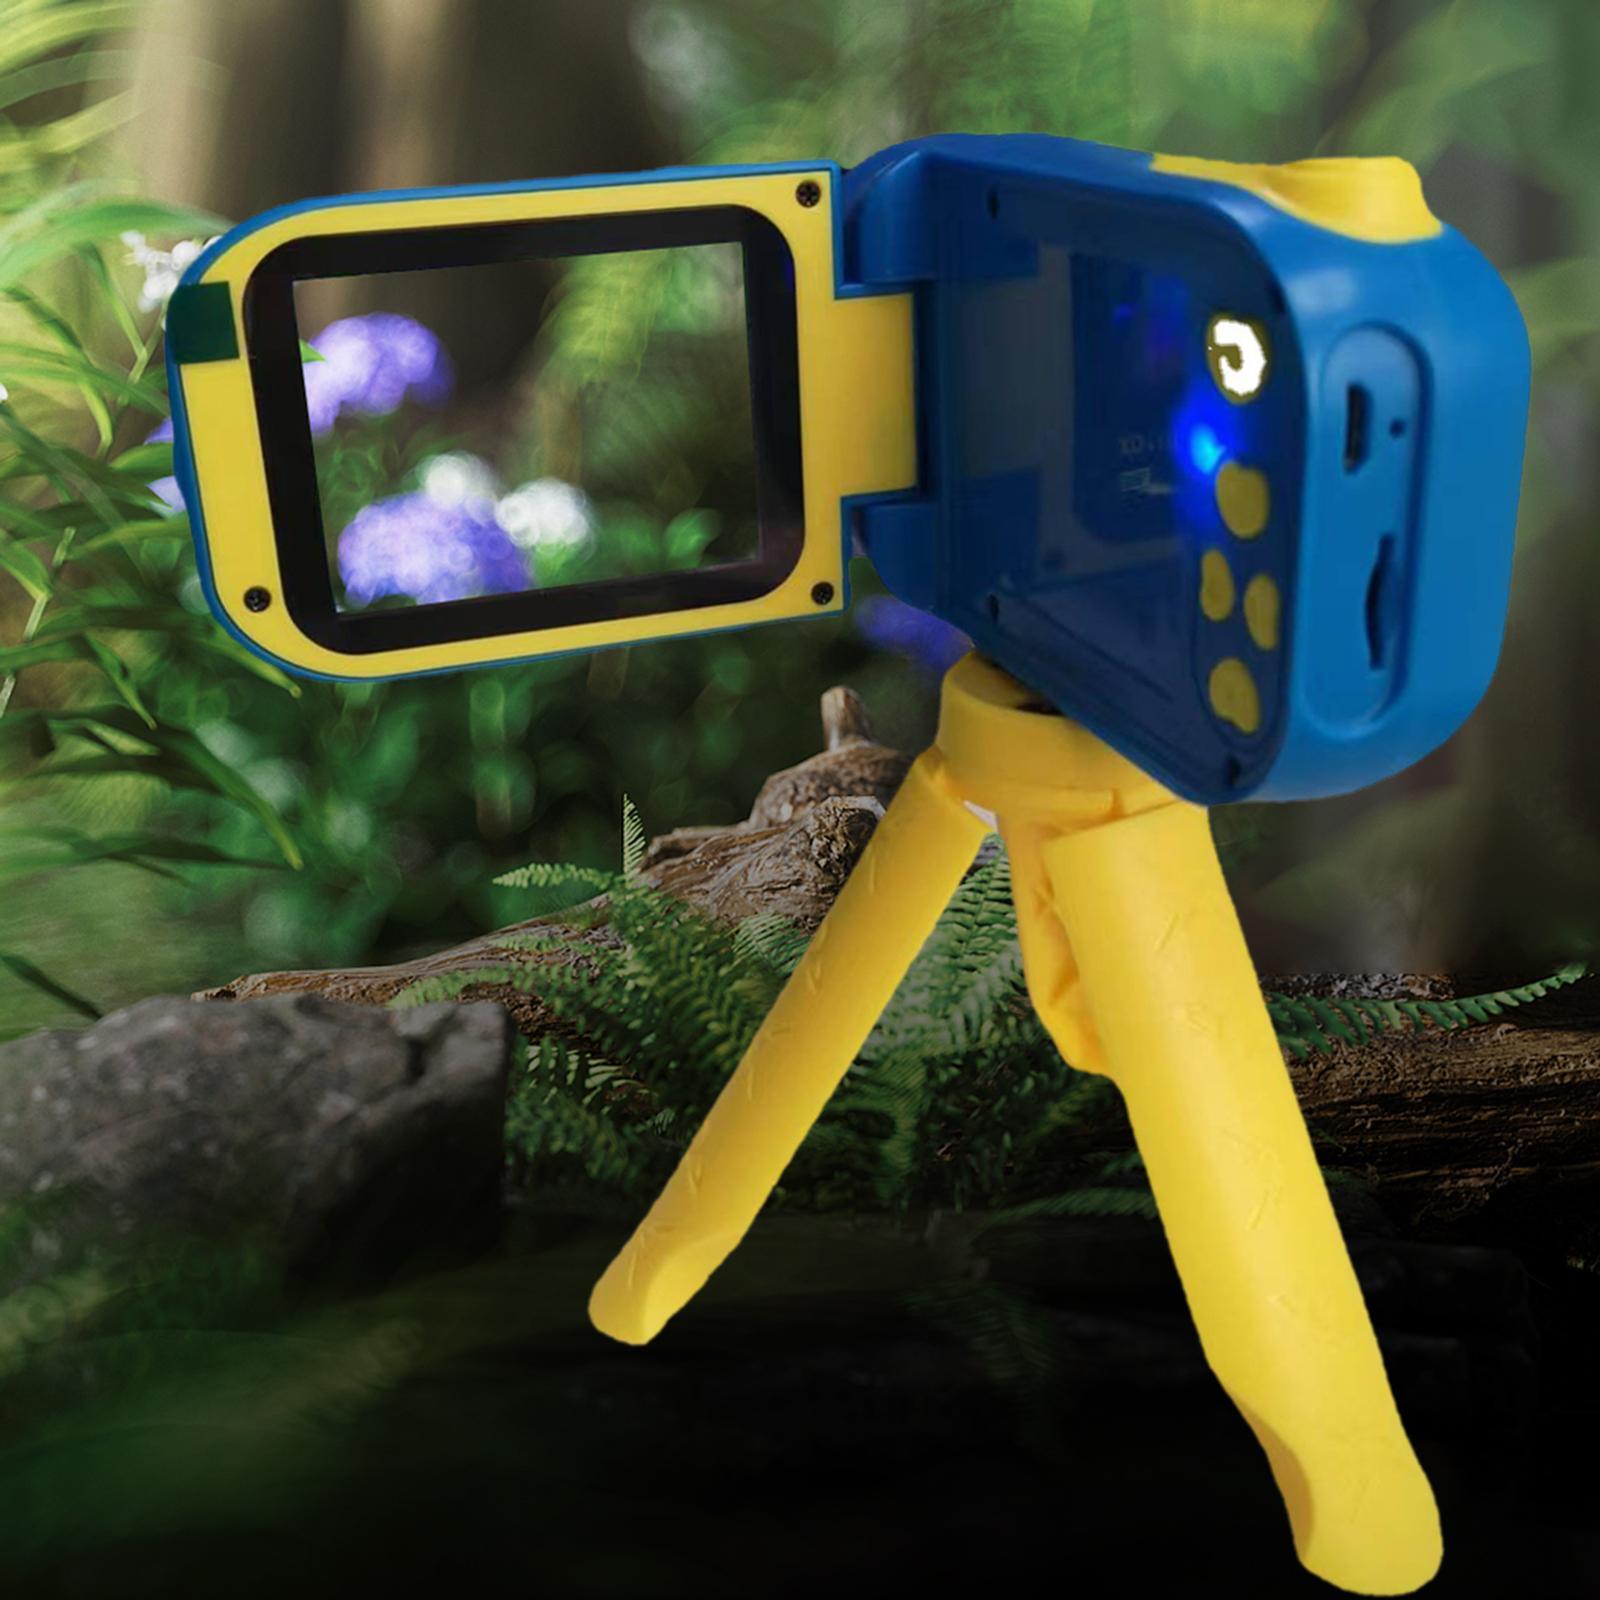 2inch LED screen kid Camera with Support Bracket Rechargeable for Birthday